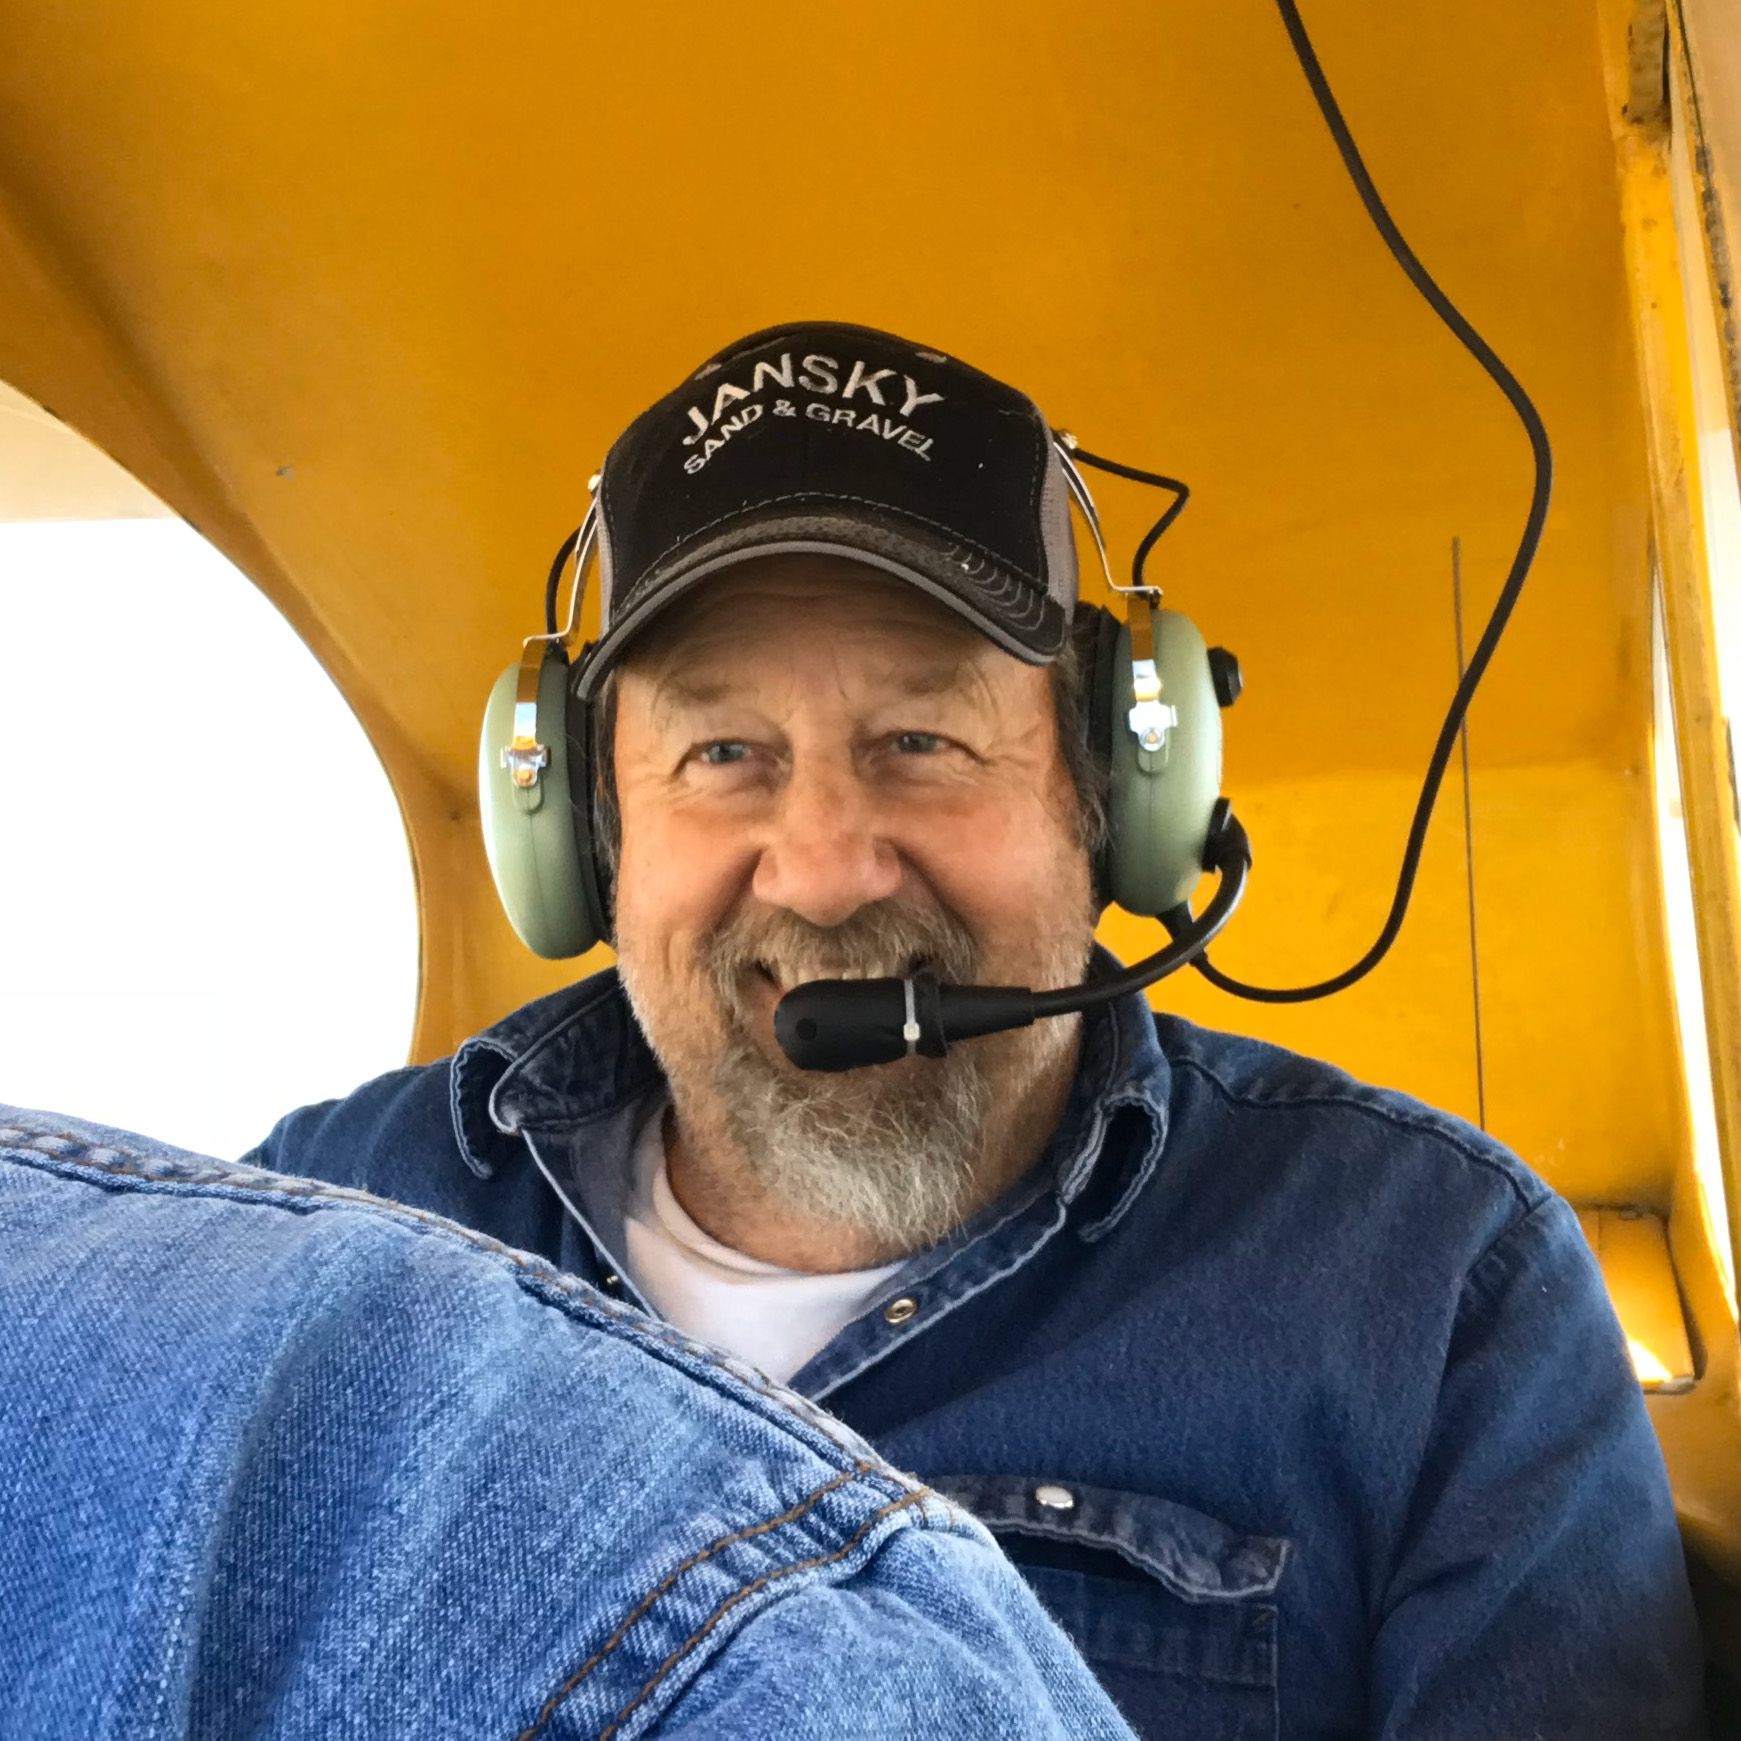 Mike Jansky in the back of a yellow Piper Cub, wearing headset and grinning ear-to-ear